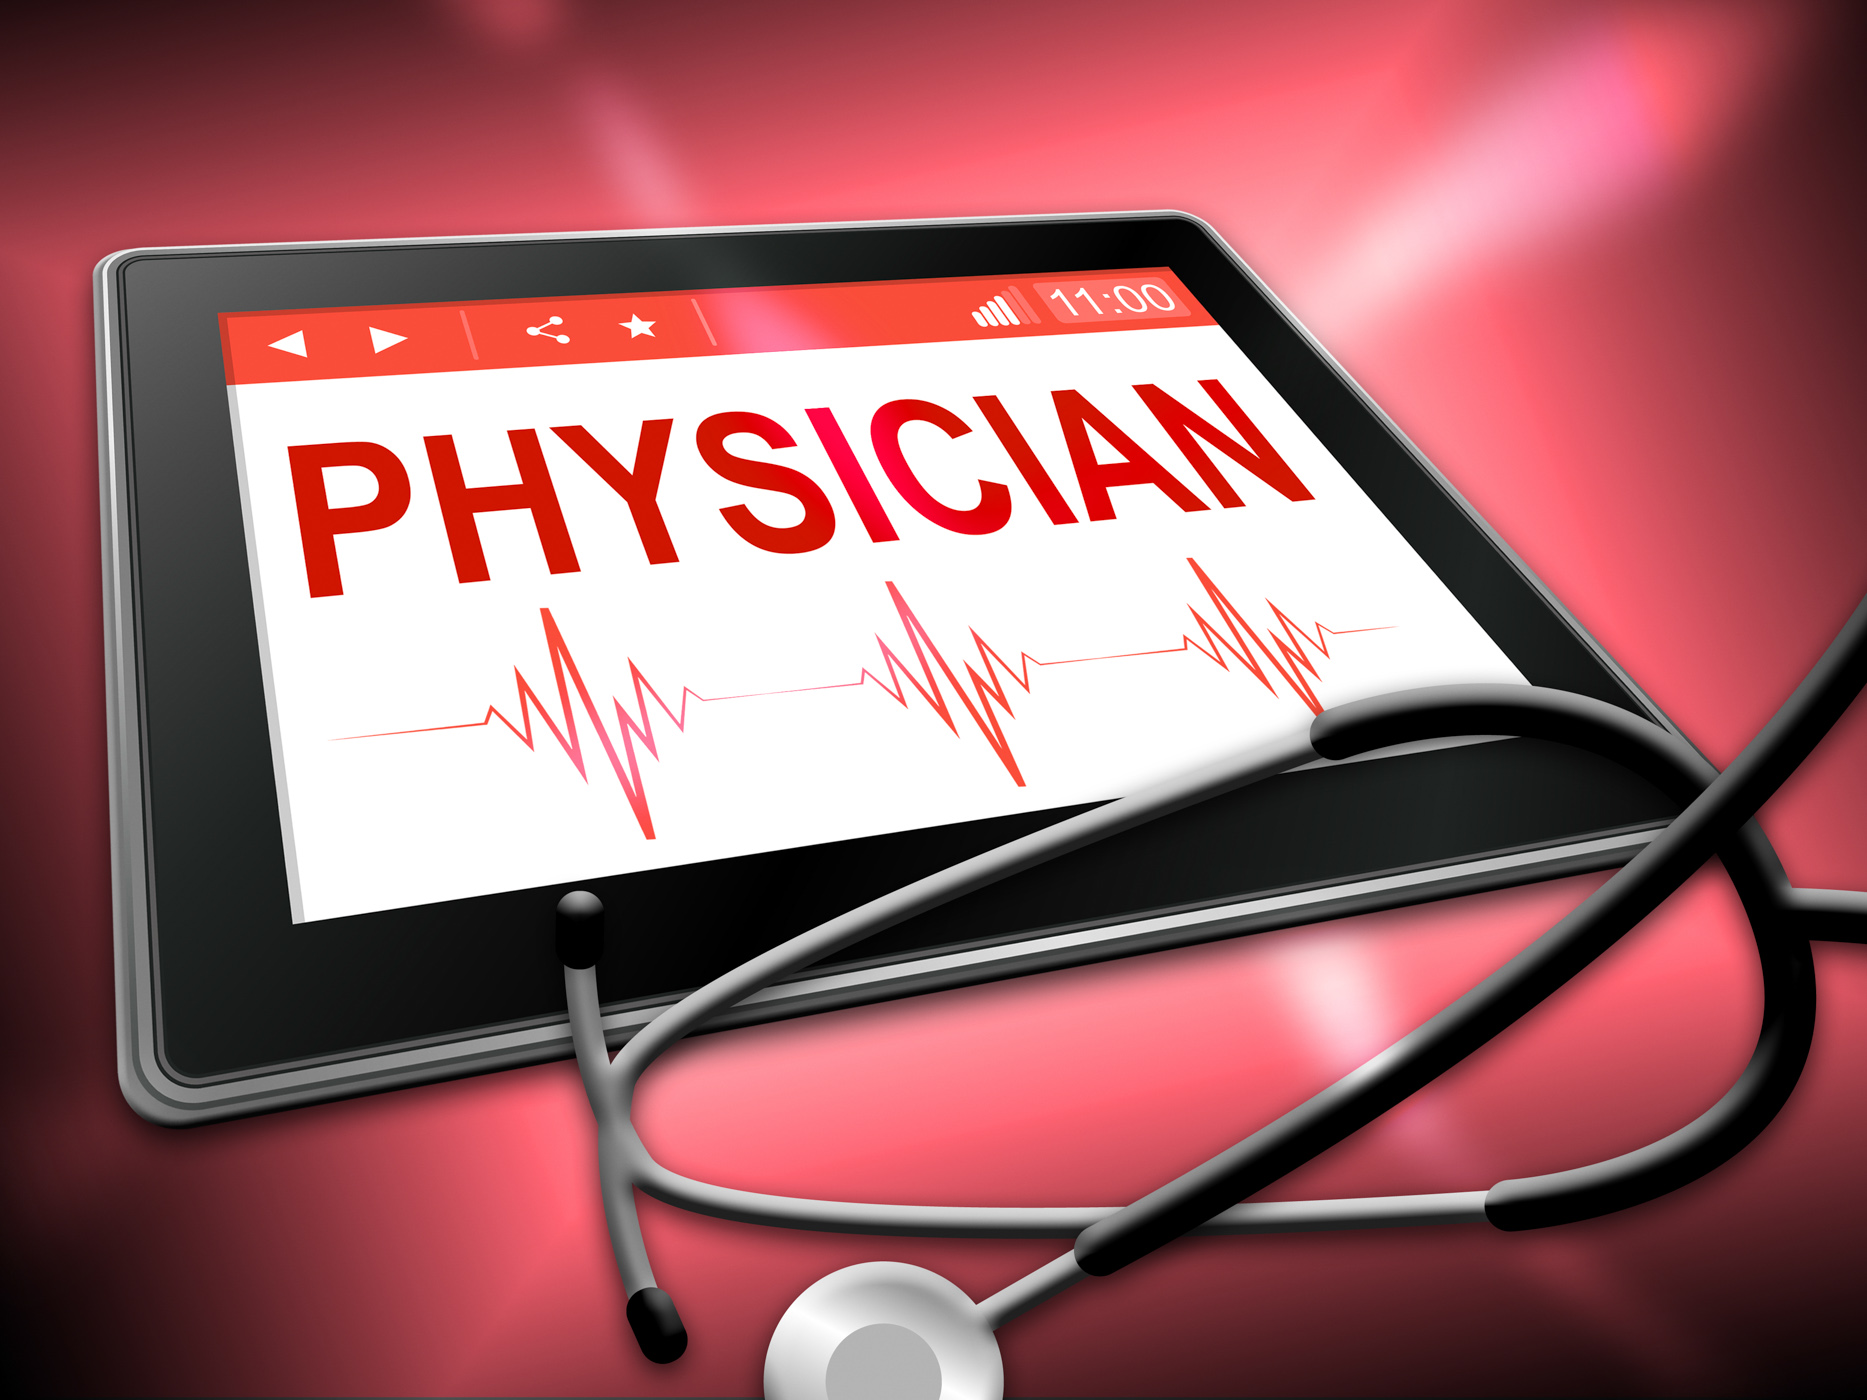 Physician tablet indicates general practitioner and md photo